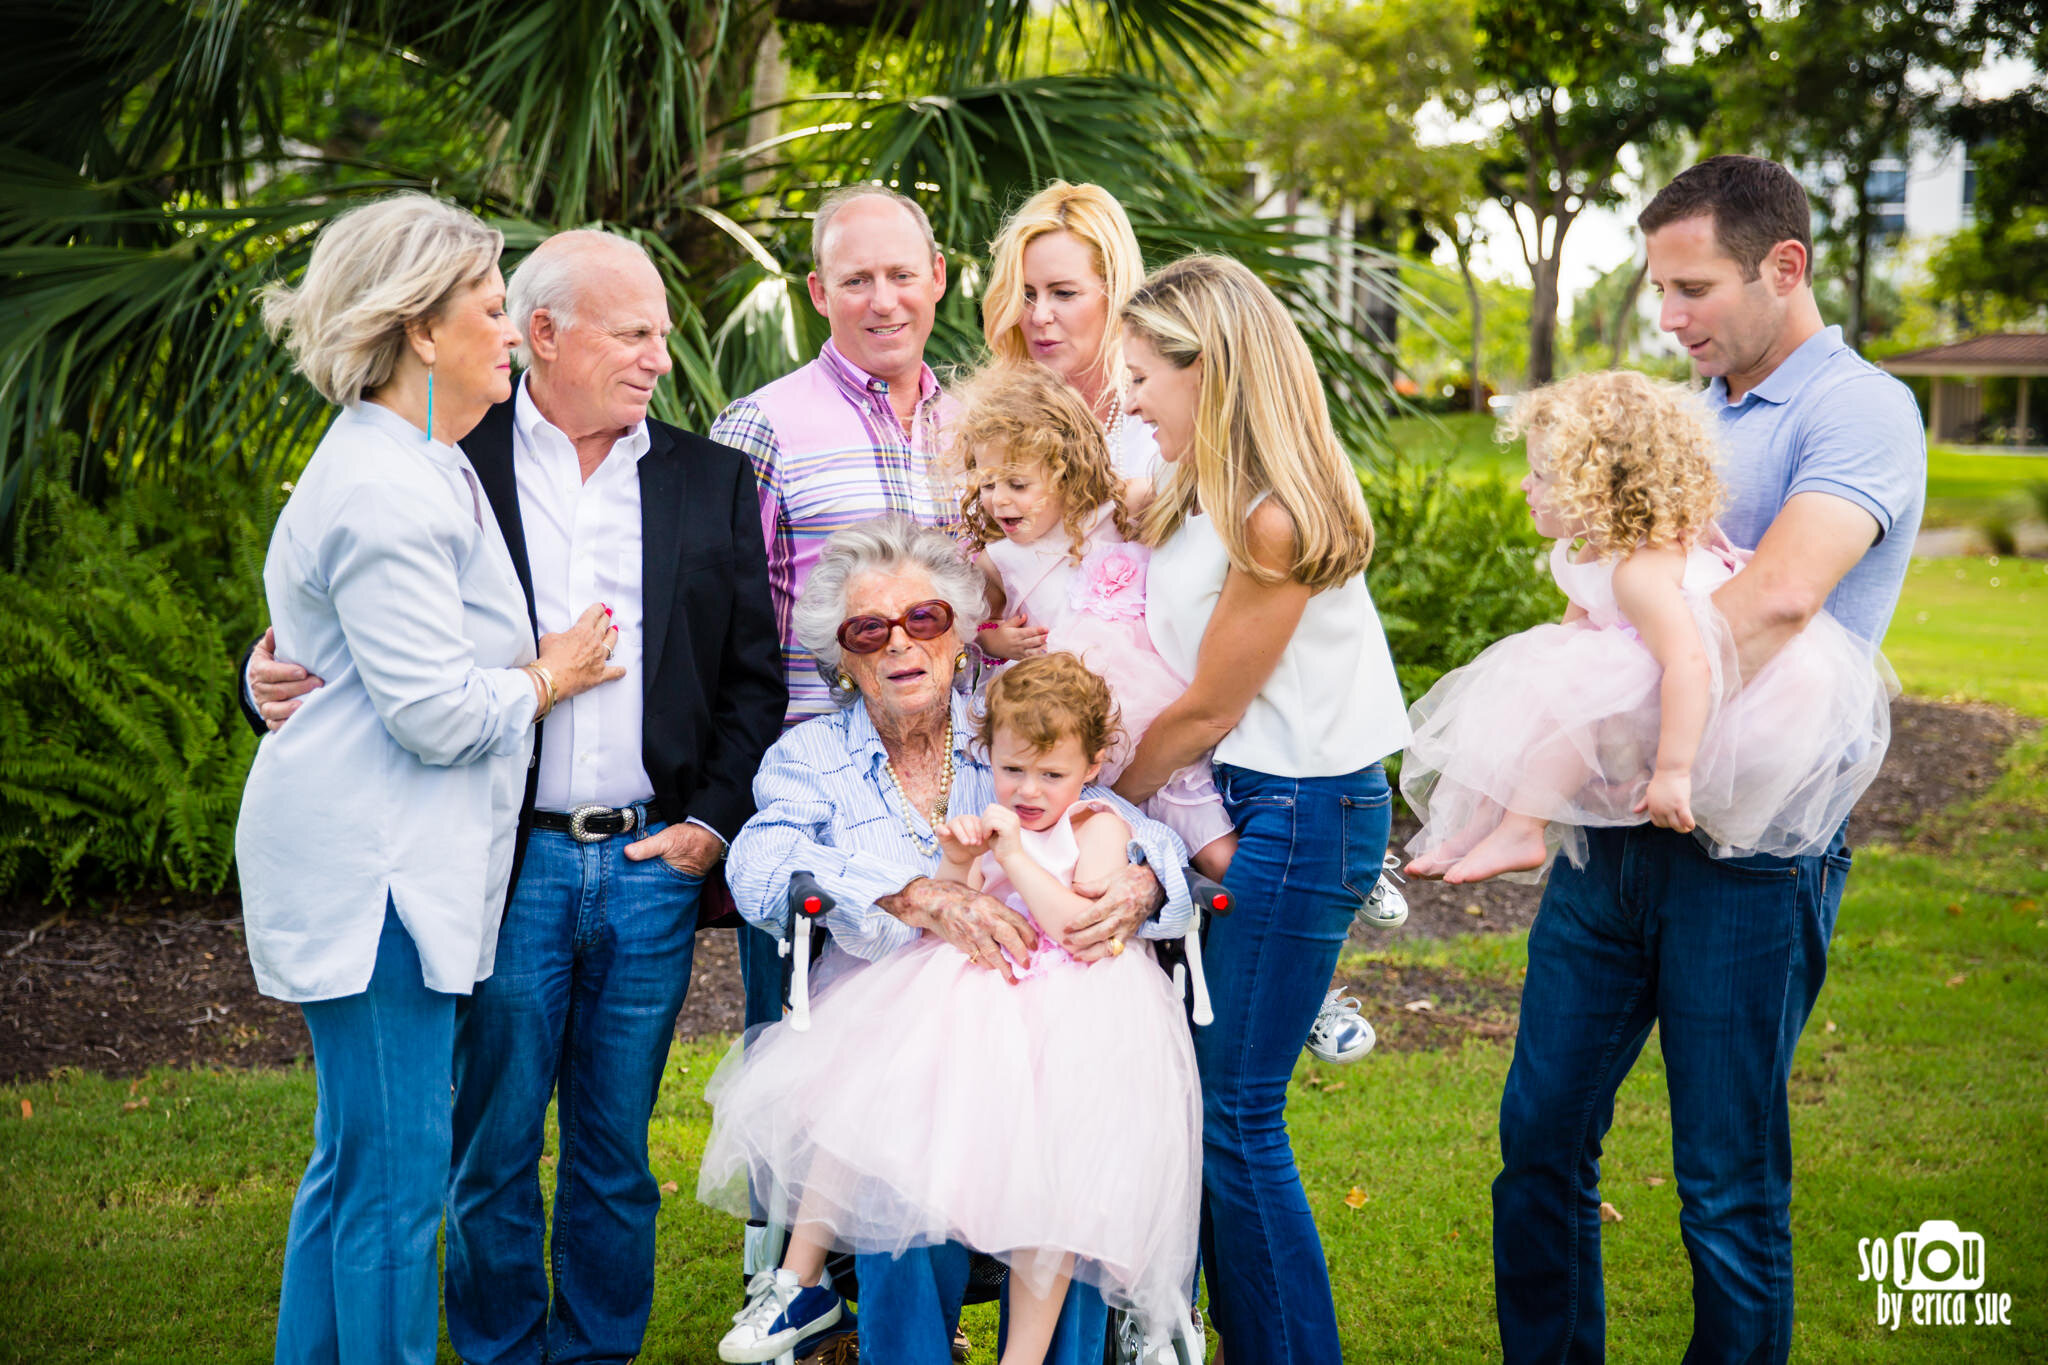 so-you-by-erica-sue-south-florida-extended-family-lifestyle-photo-session-2120.JPG